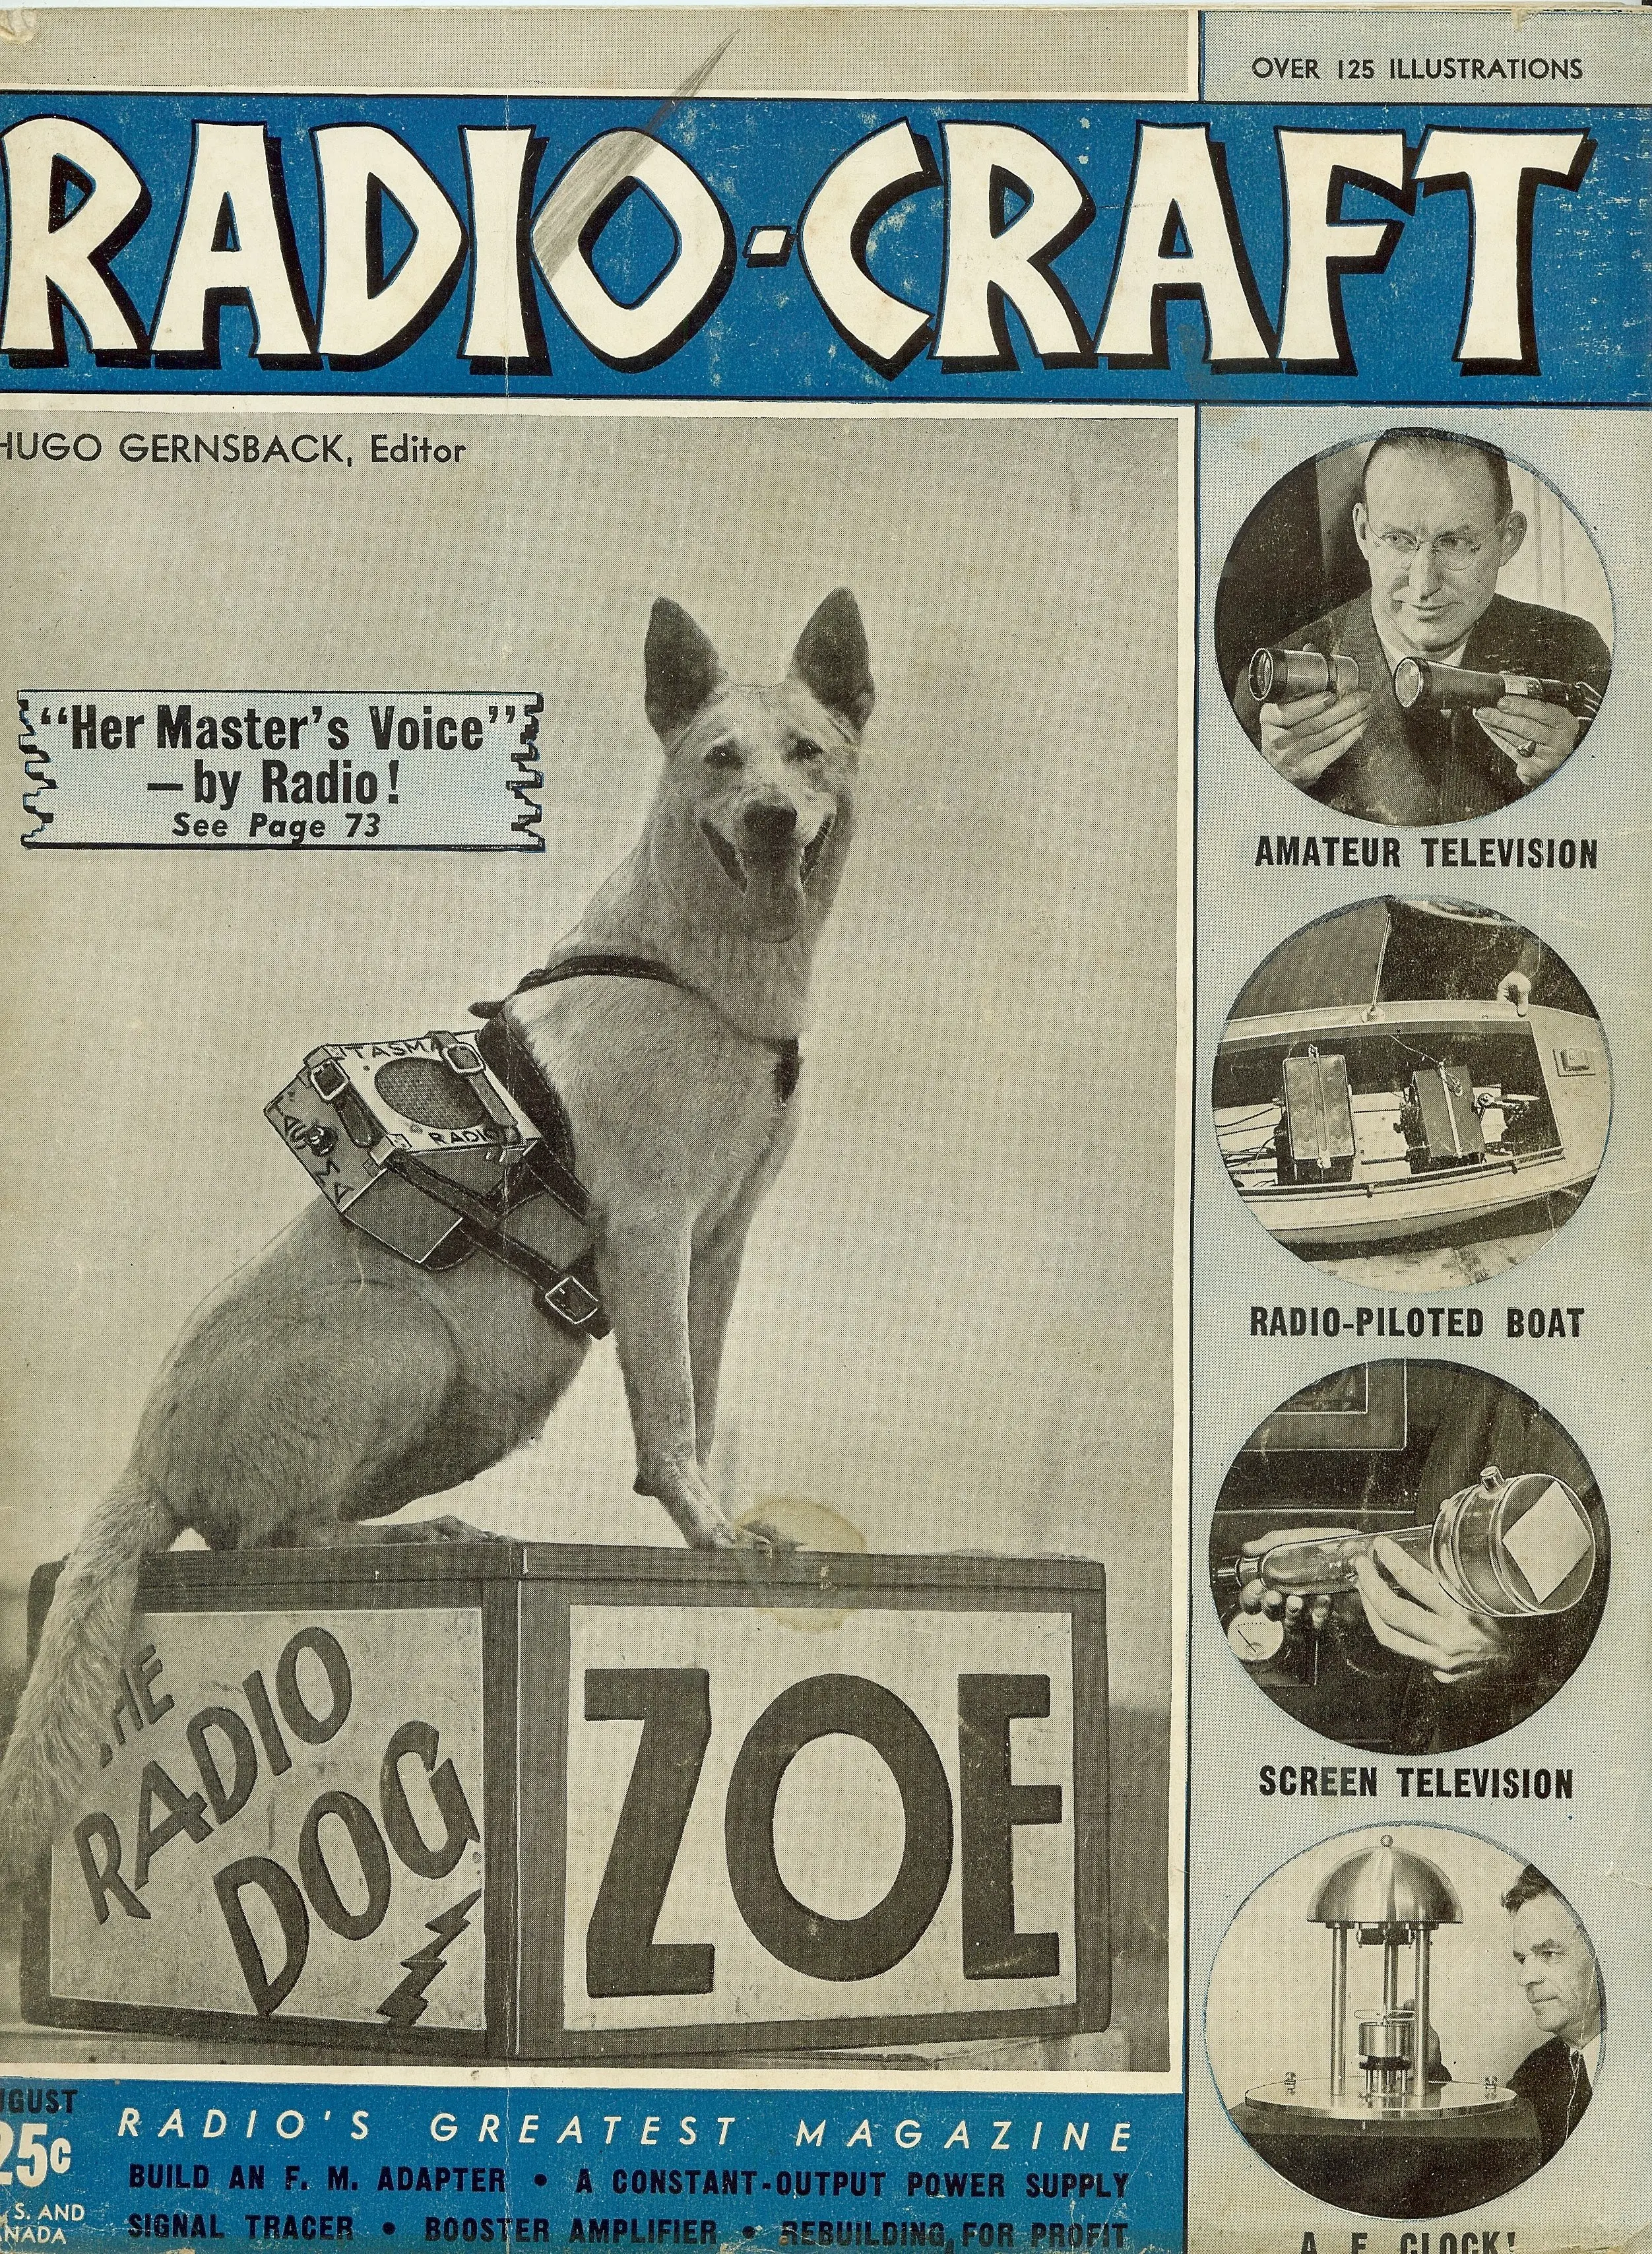 Magazine cover of "Radio Craft" with picture of dog with radio strapped to its body and quote "Her master's voice - by Radio"